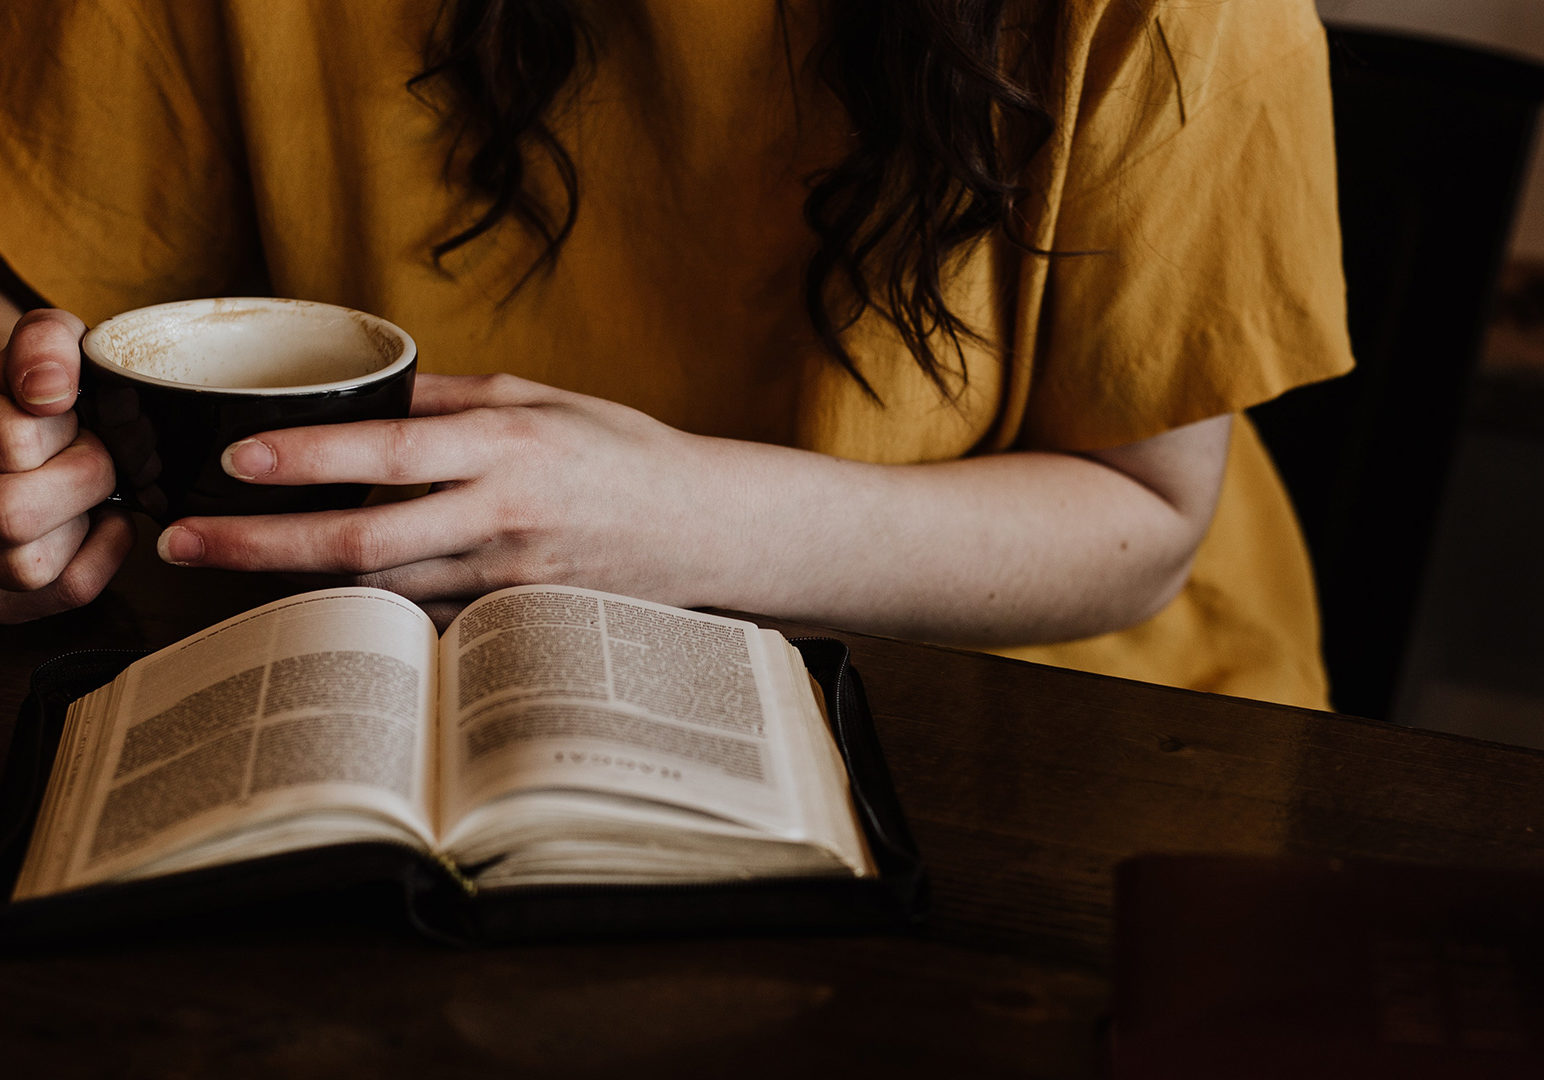 woman-holding-mug-in front-of-Bible